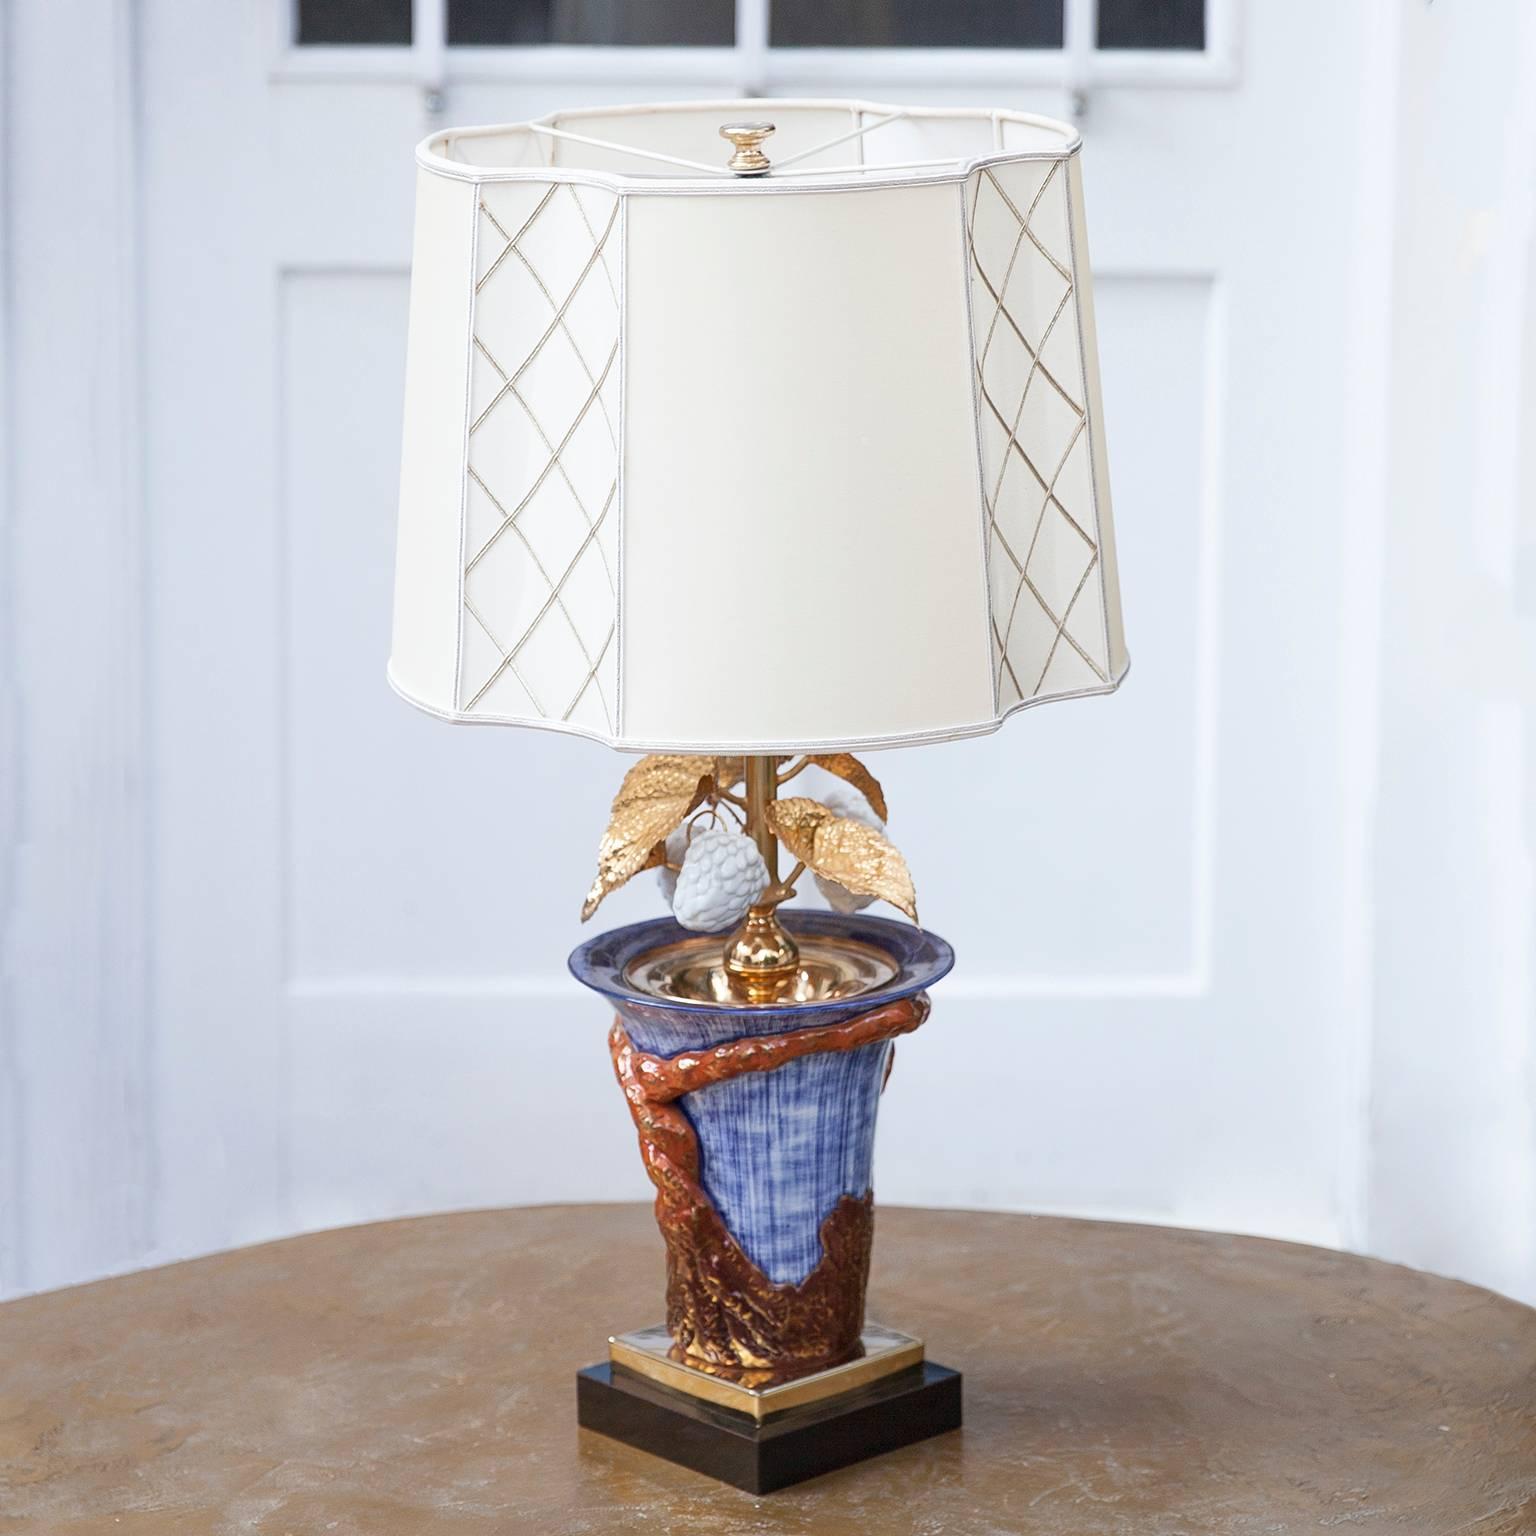 Very elegant French porcelain table lamp with silk shade and gold plated leaves and white porcelain fruits, France 1970s.

Measures: H 73 x D 35 cm.